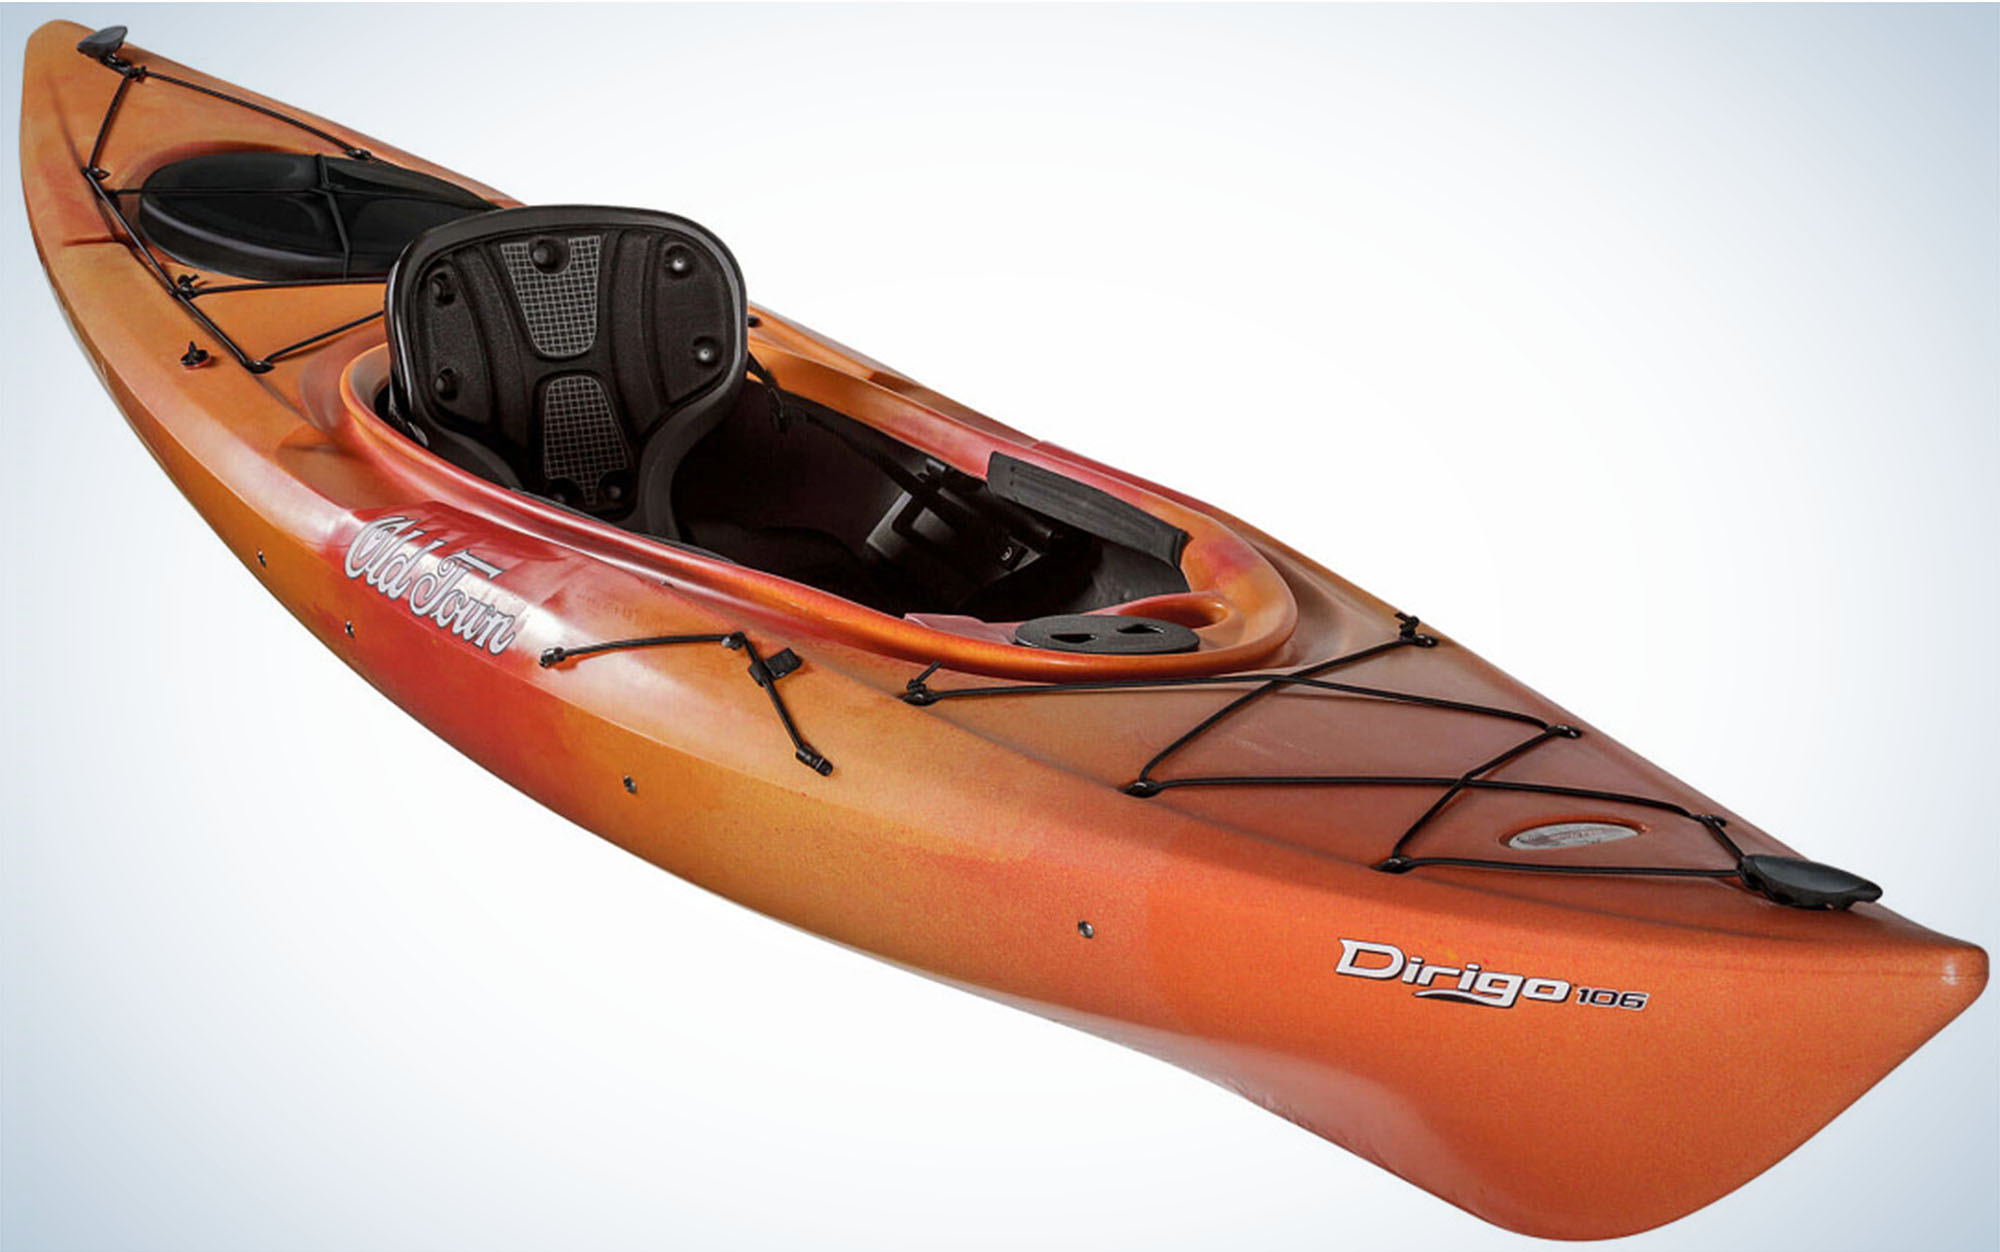 The Old Town Dirigo 106 is one of the best duck hunting kayaks.